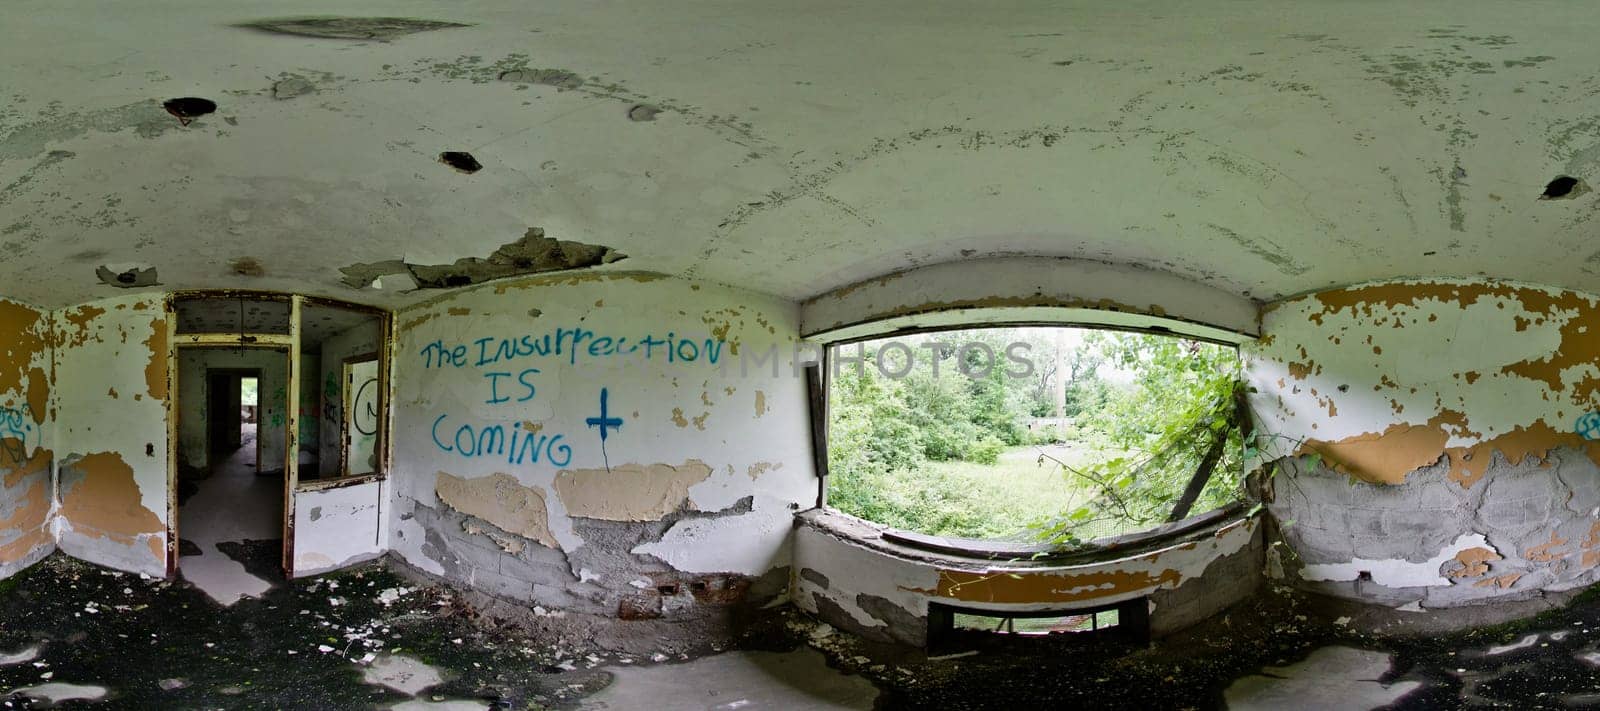 Explore the haunting beauty of an abandoned TB hospital in Lima, Ohio. Capture the eerie decay, graffiti messages, and nature's encroachment in this panoramic view.